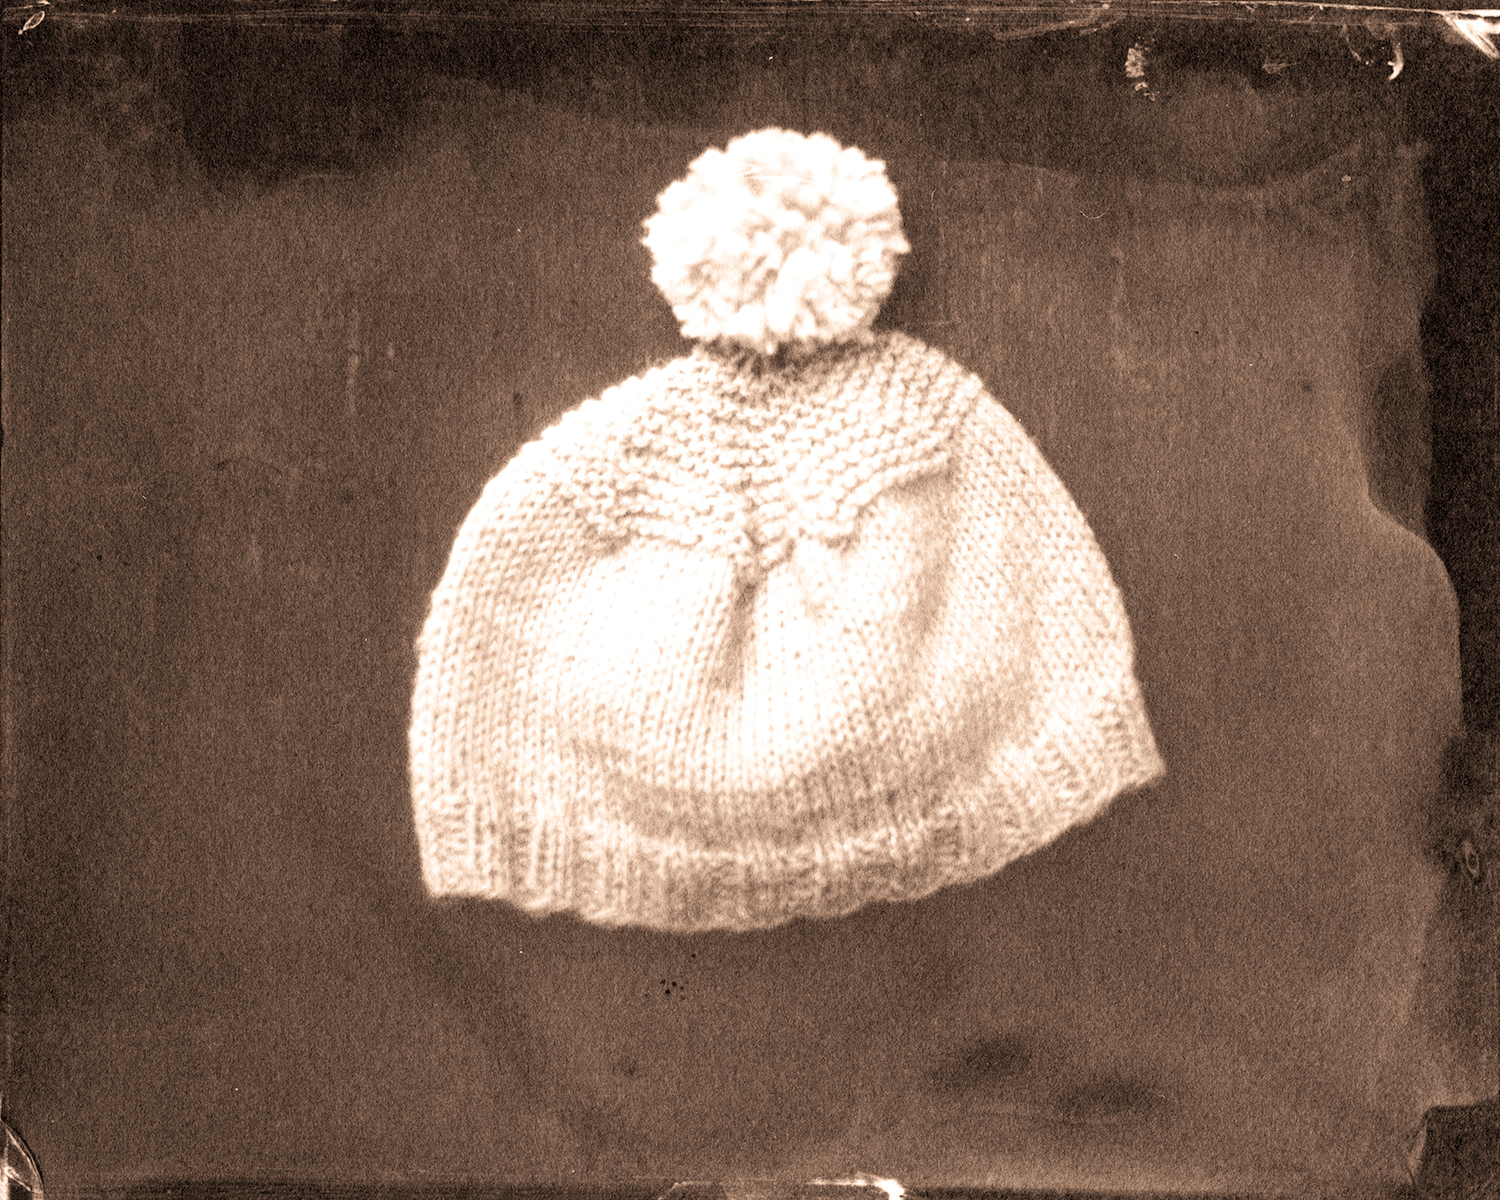 The birth cap she knitted for him.